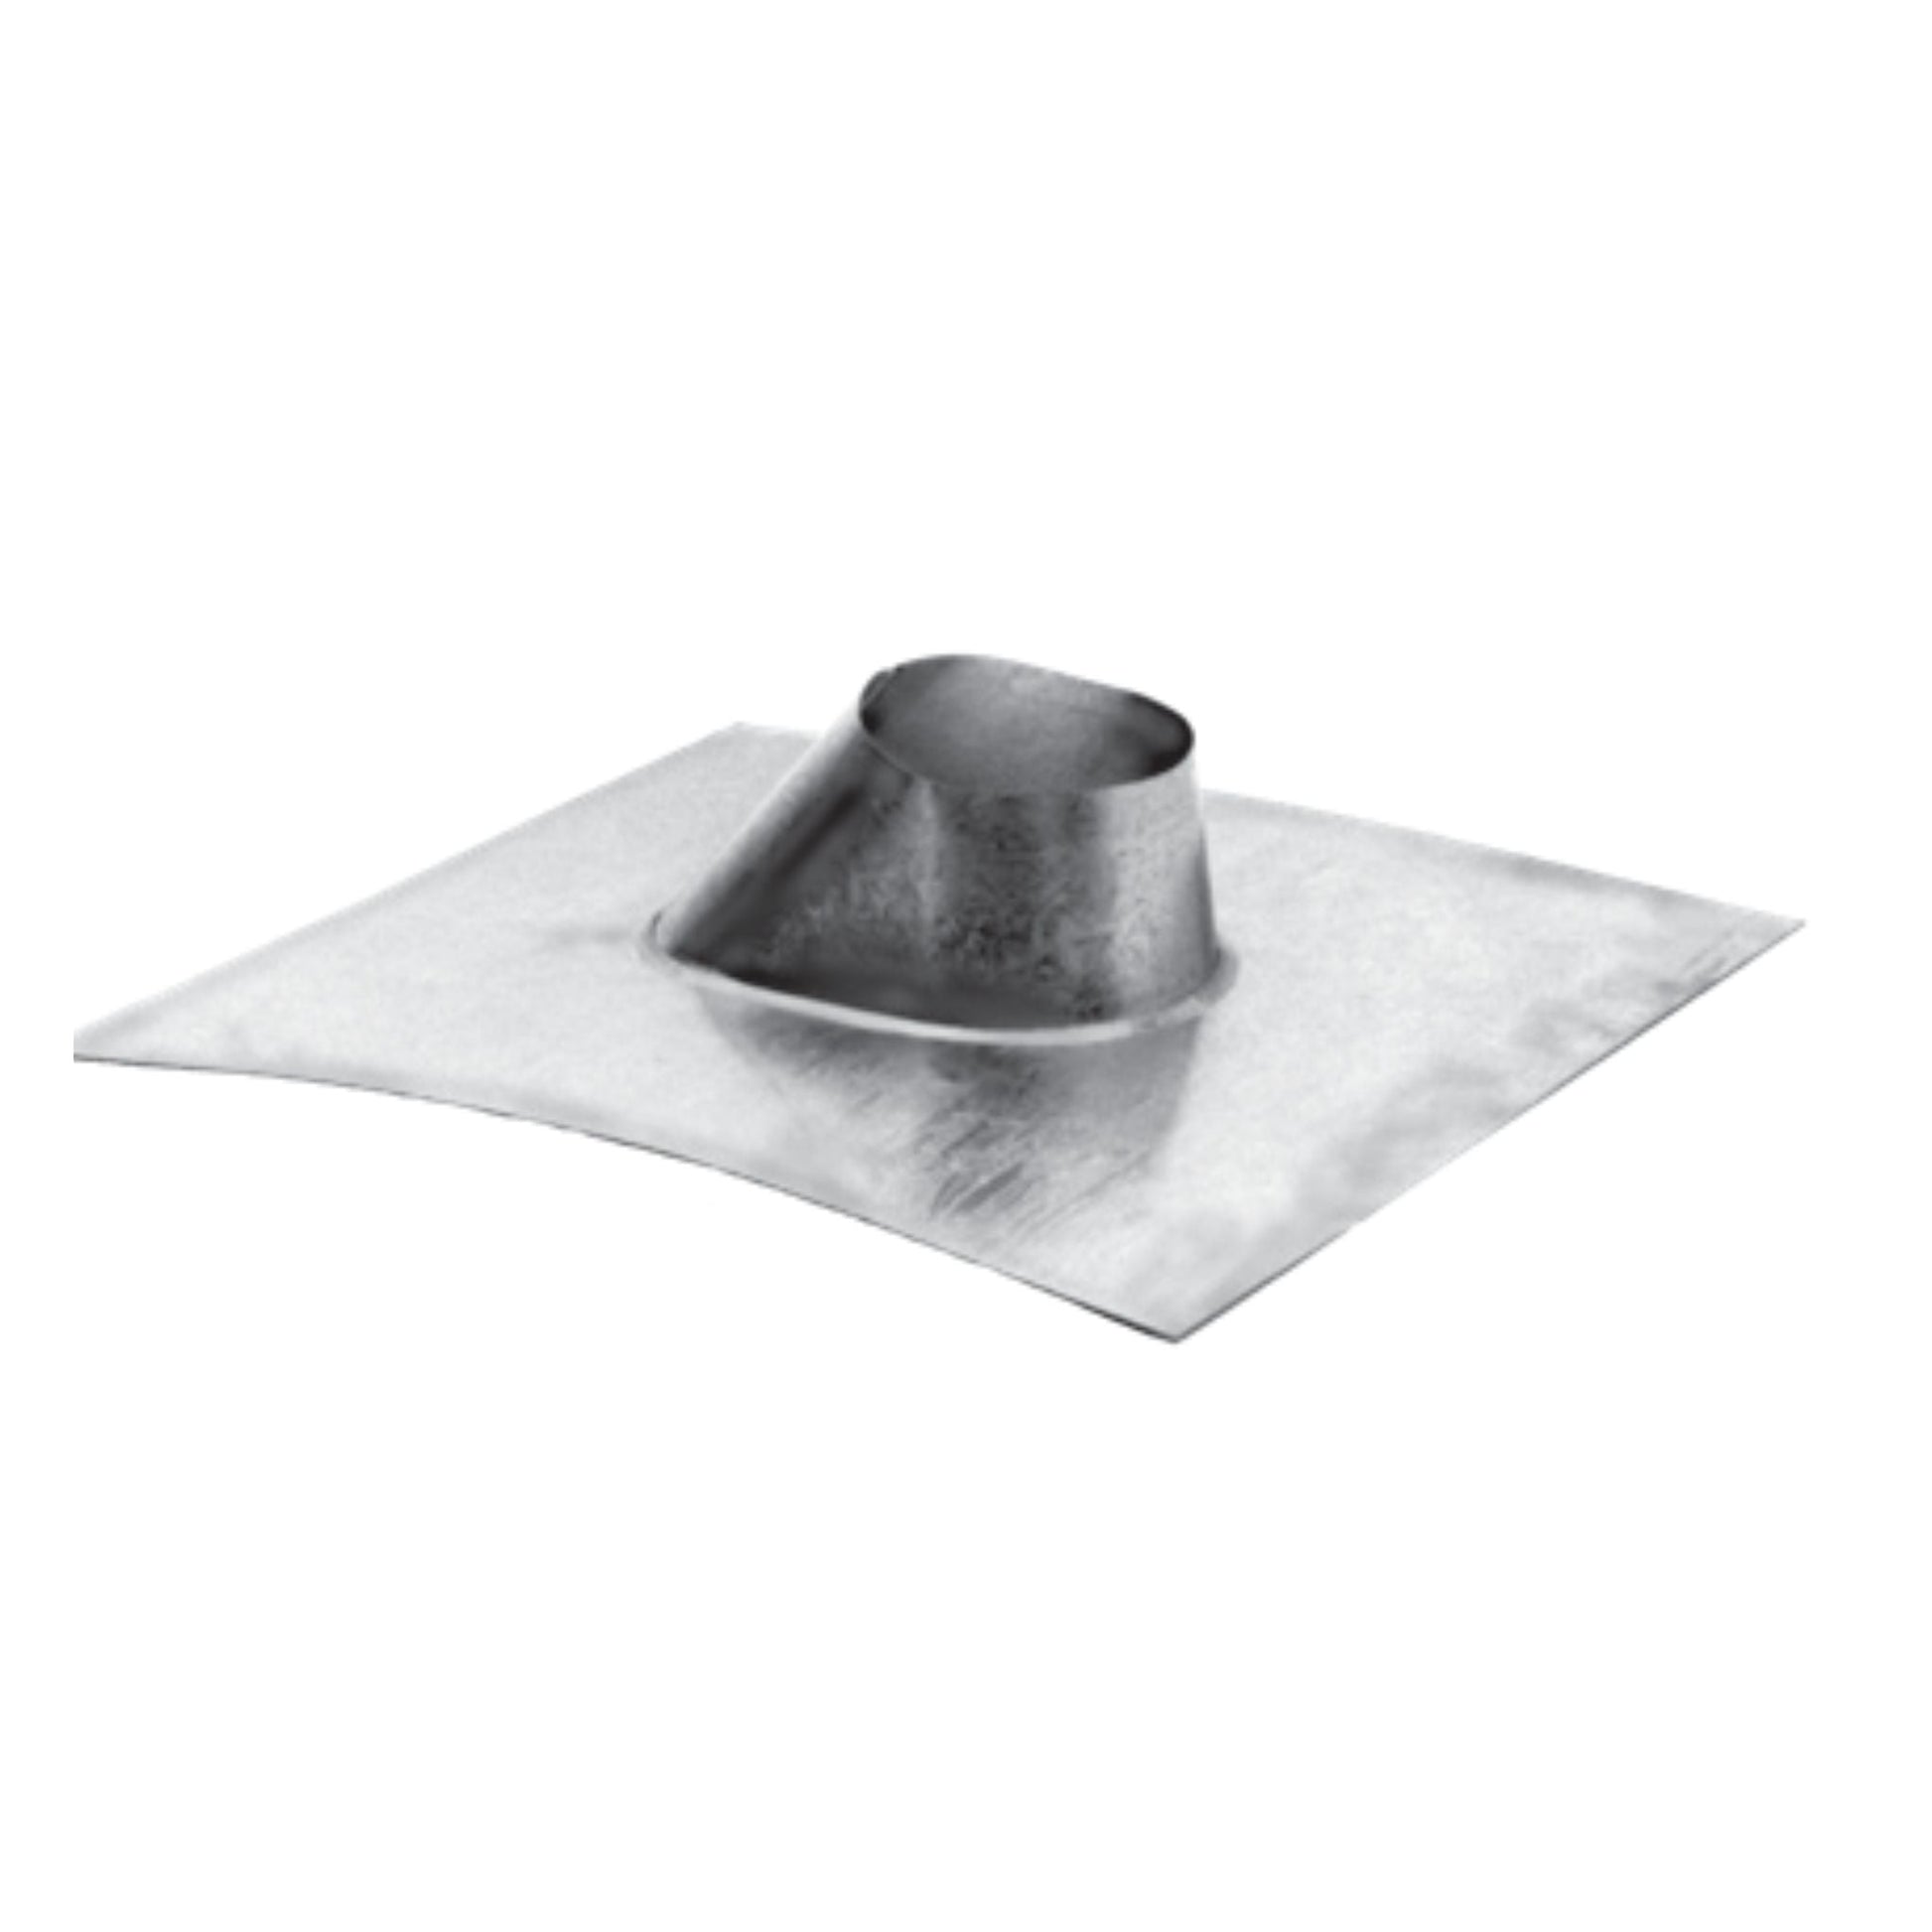 DuraVent Concentric Vent System 3" x 5" DSA Roof Flashing